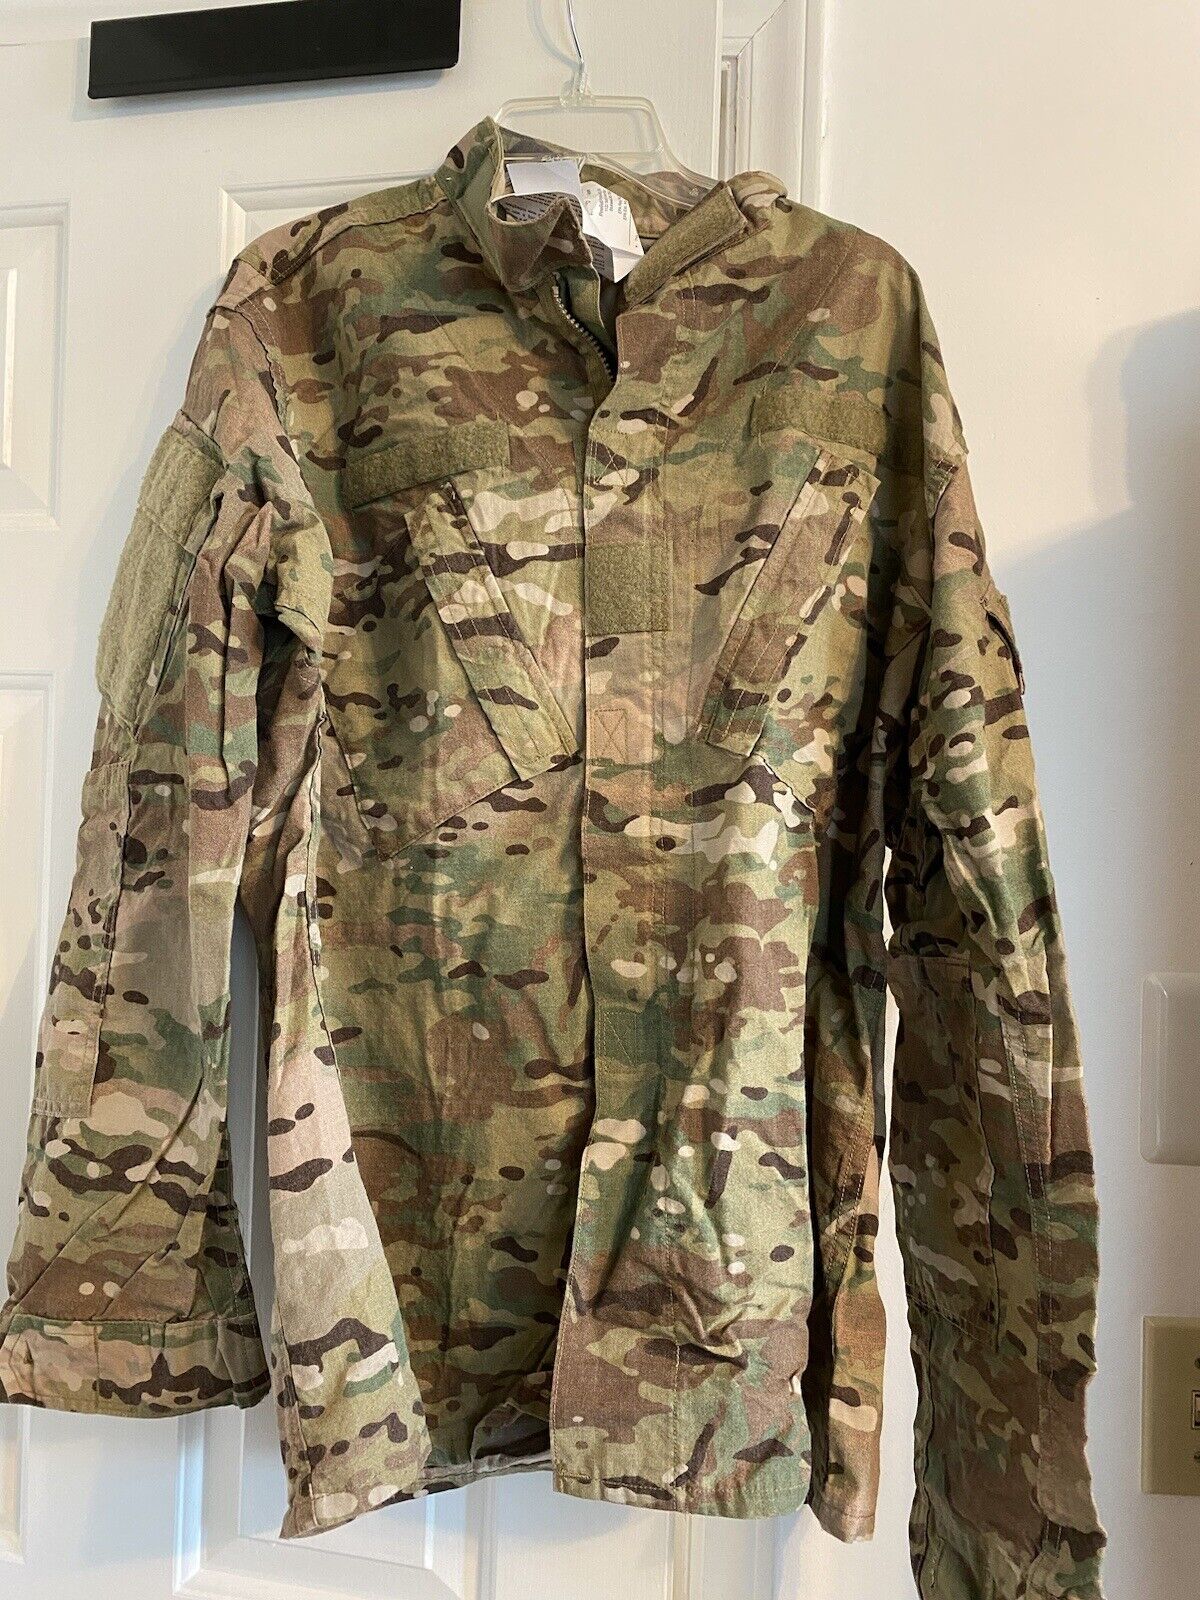 Army USAF Combat Blouse OCP. Size Medium Long (Men’s). New With Tags.